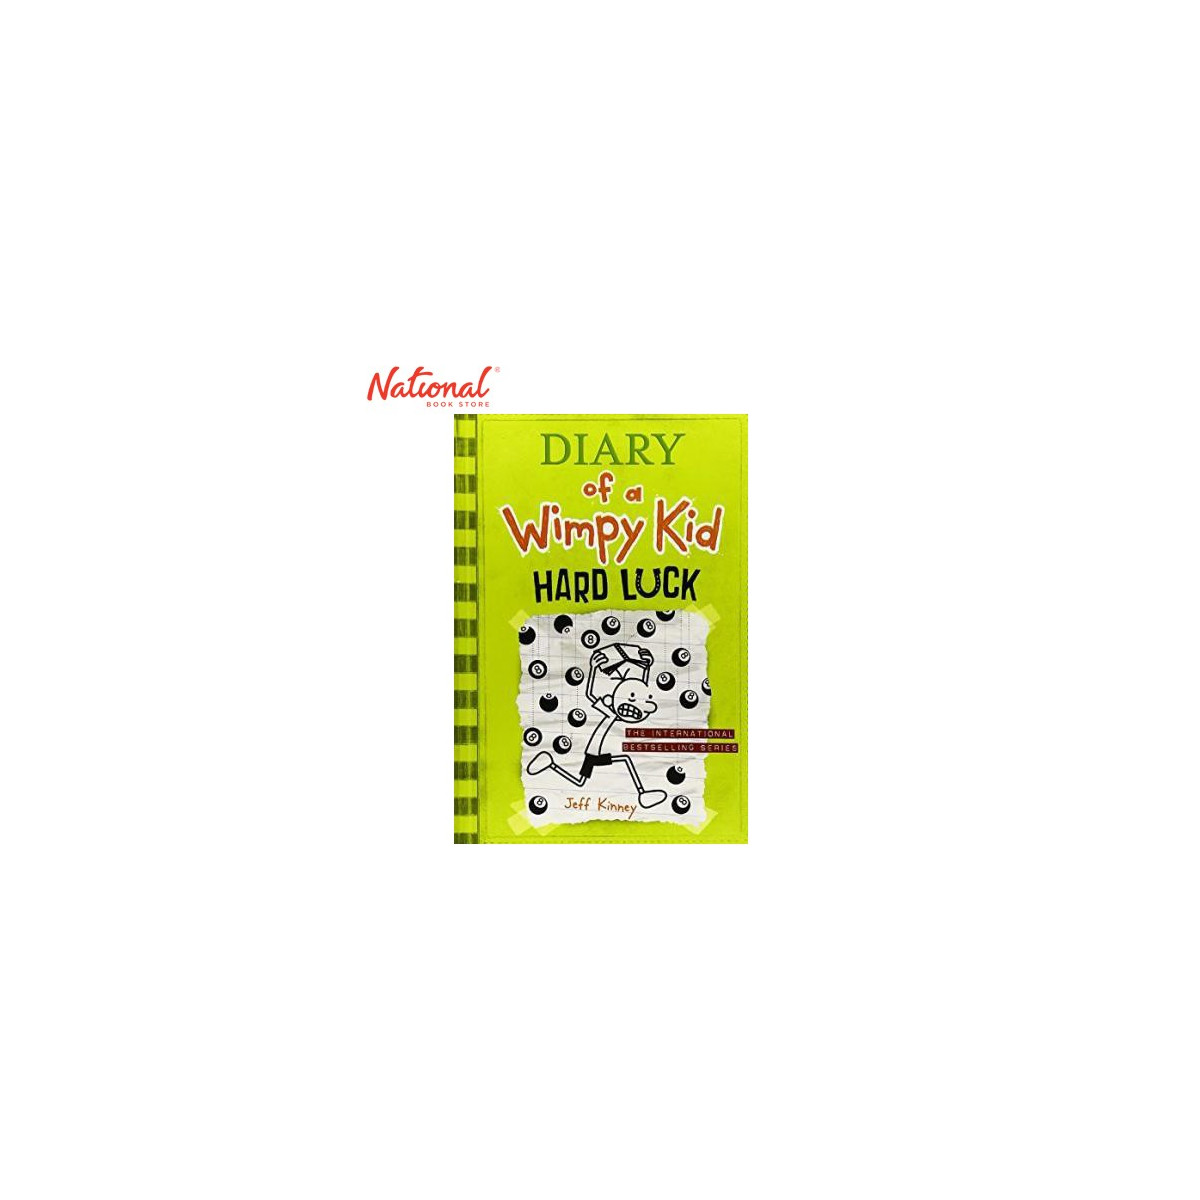 DIARY OF A WIMPY KID 08. HARD LUCK BY JEFF KINNEY